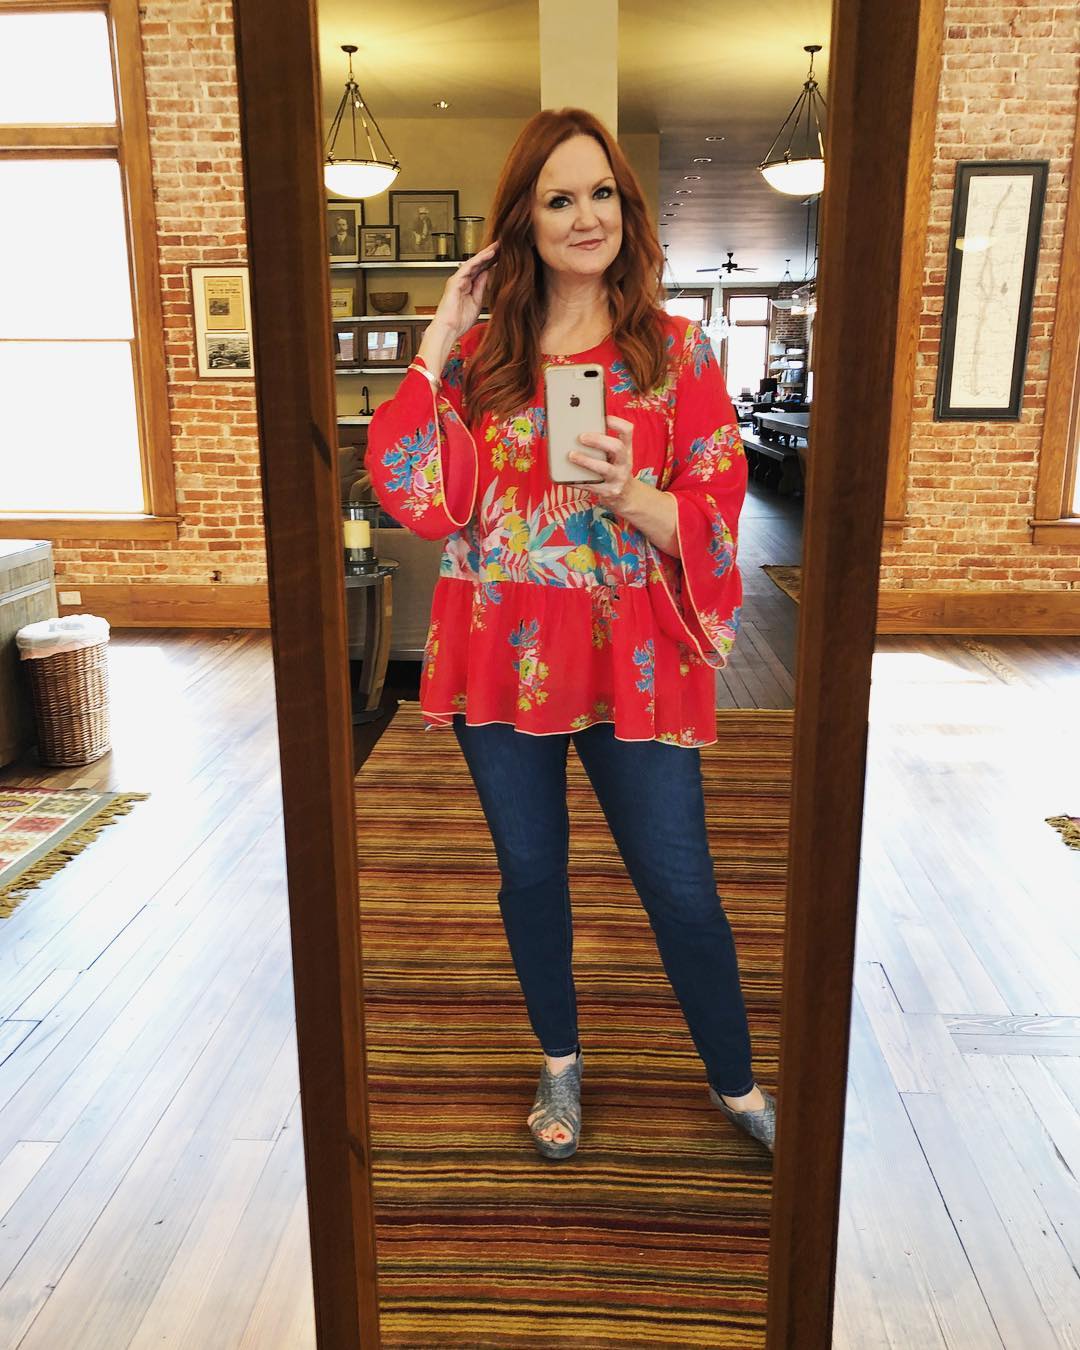 Food Network's Ree Drummond Shares 5 Unknown Facts About Herself